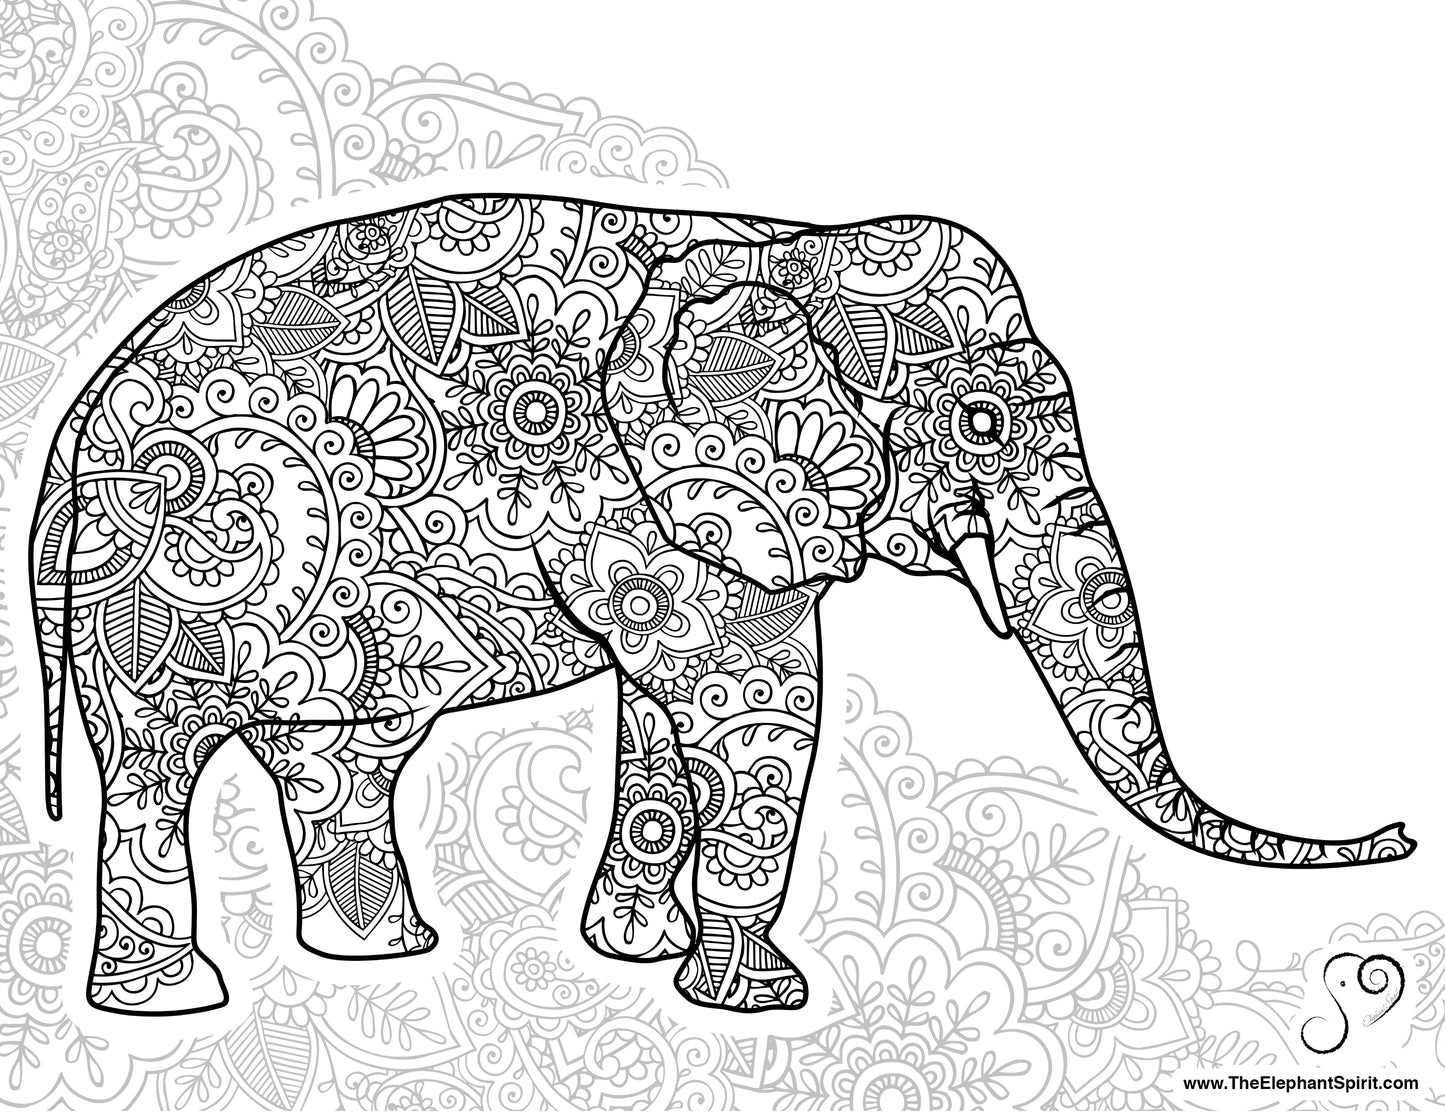 FREE Coloring Page 10-20